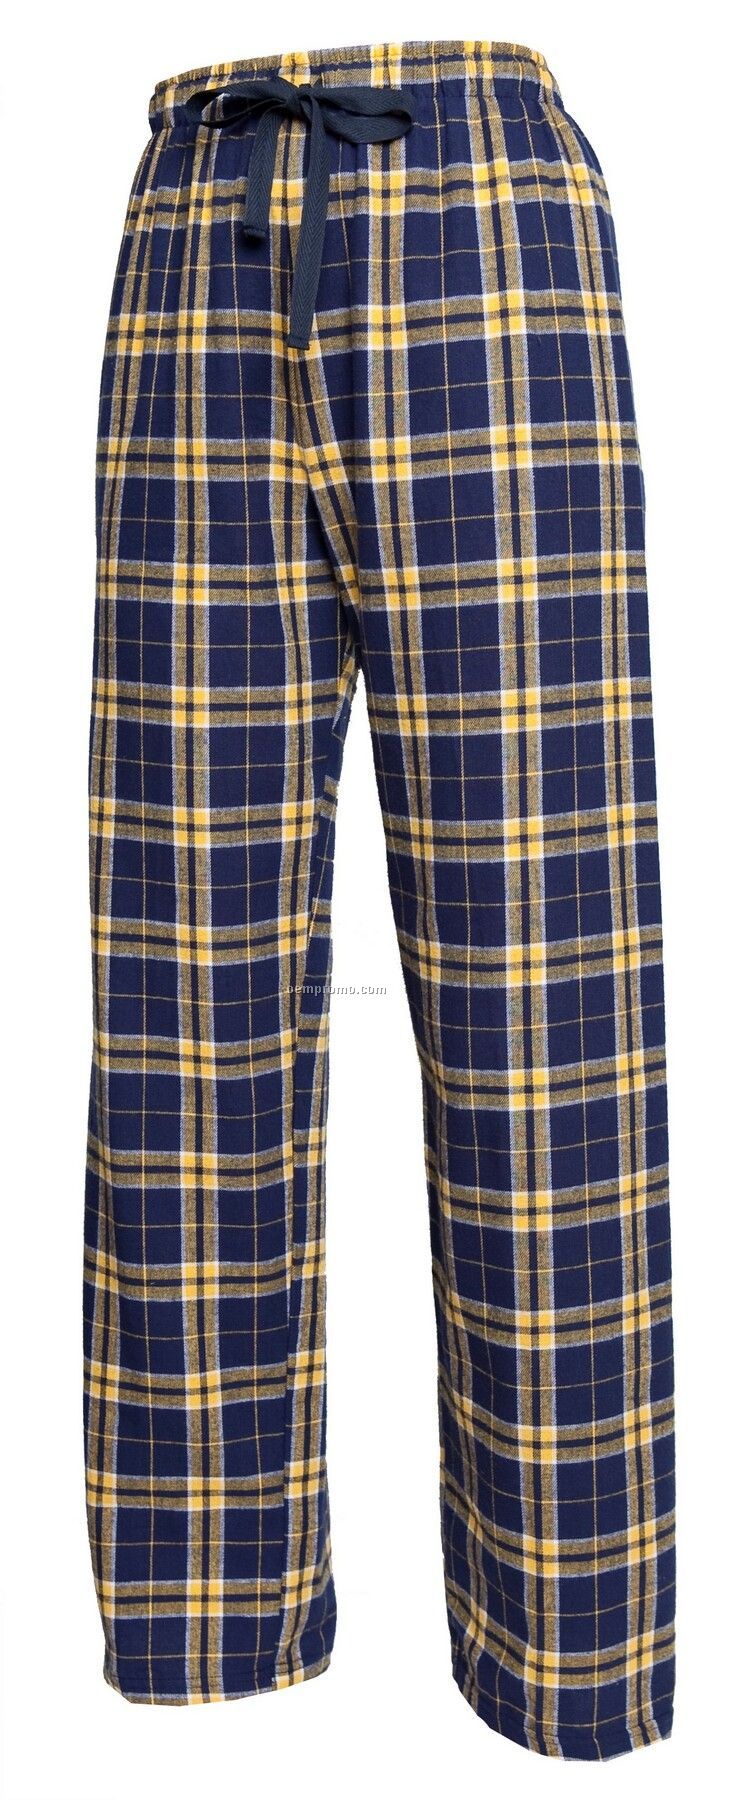 Youth Team Pride Flannel Pant In Navy Blue & Gold Plaid